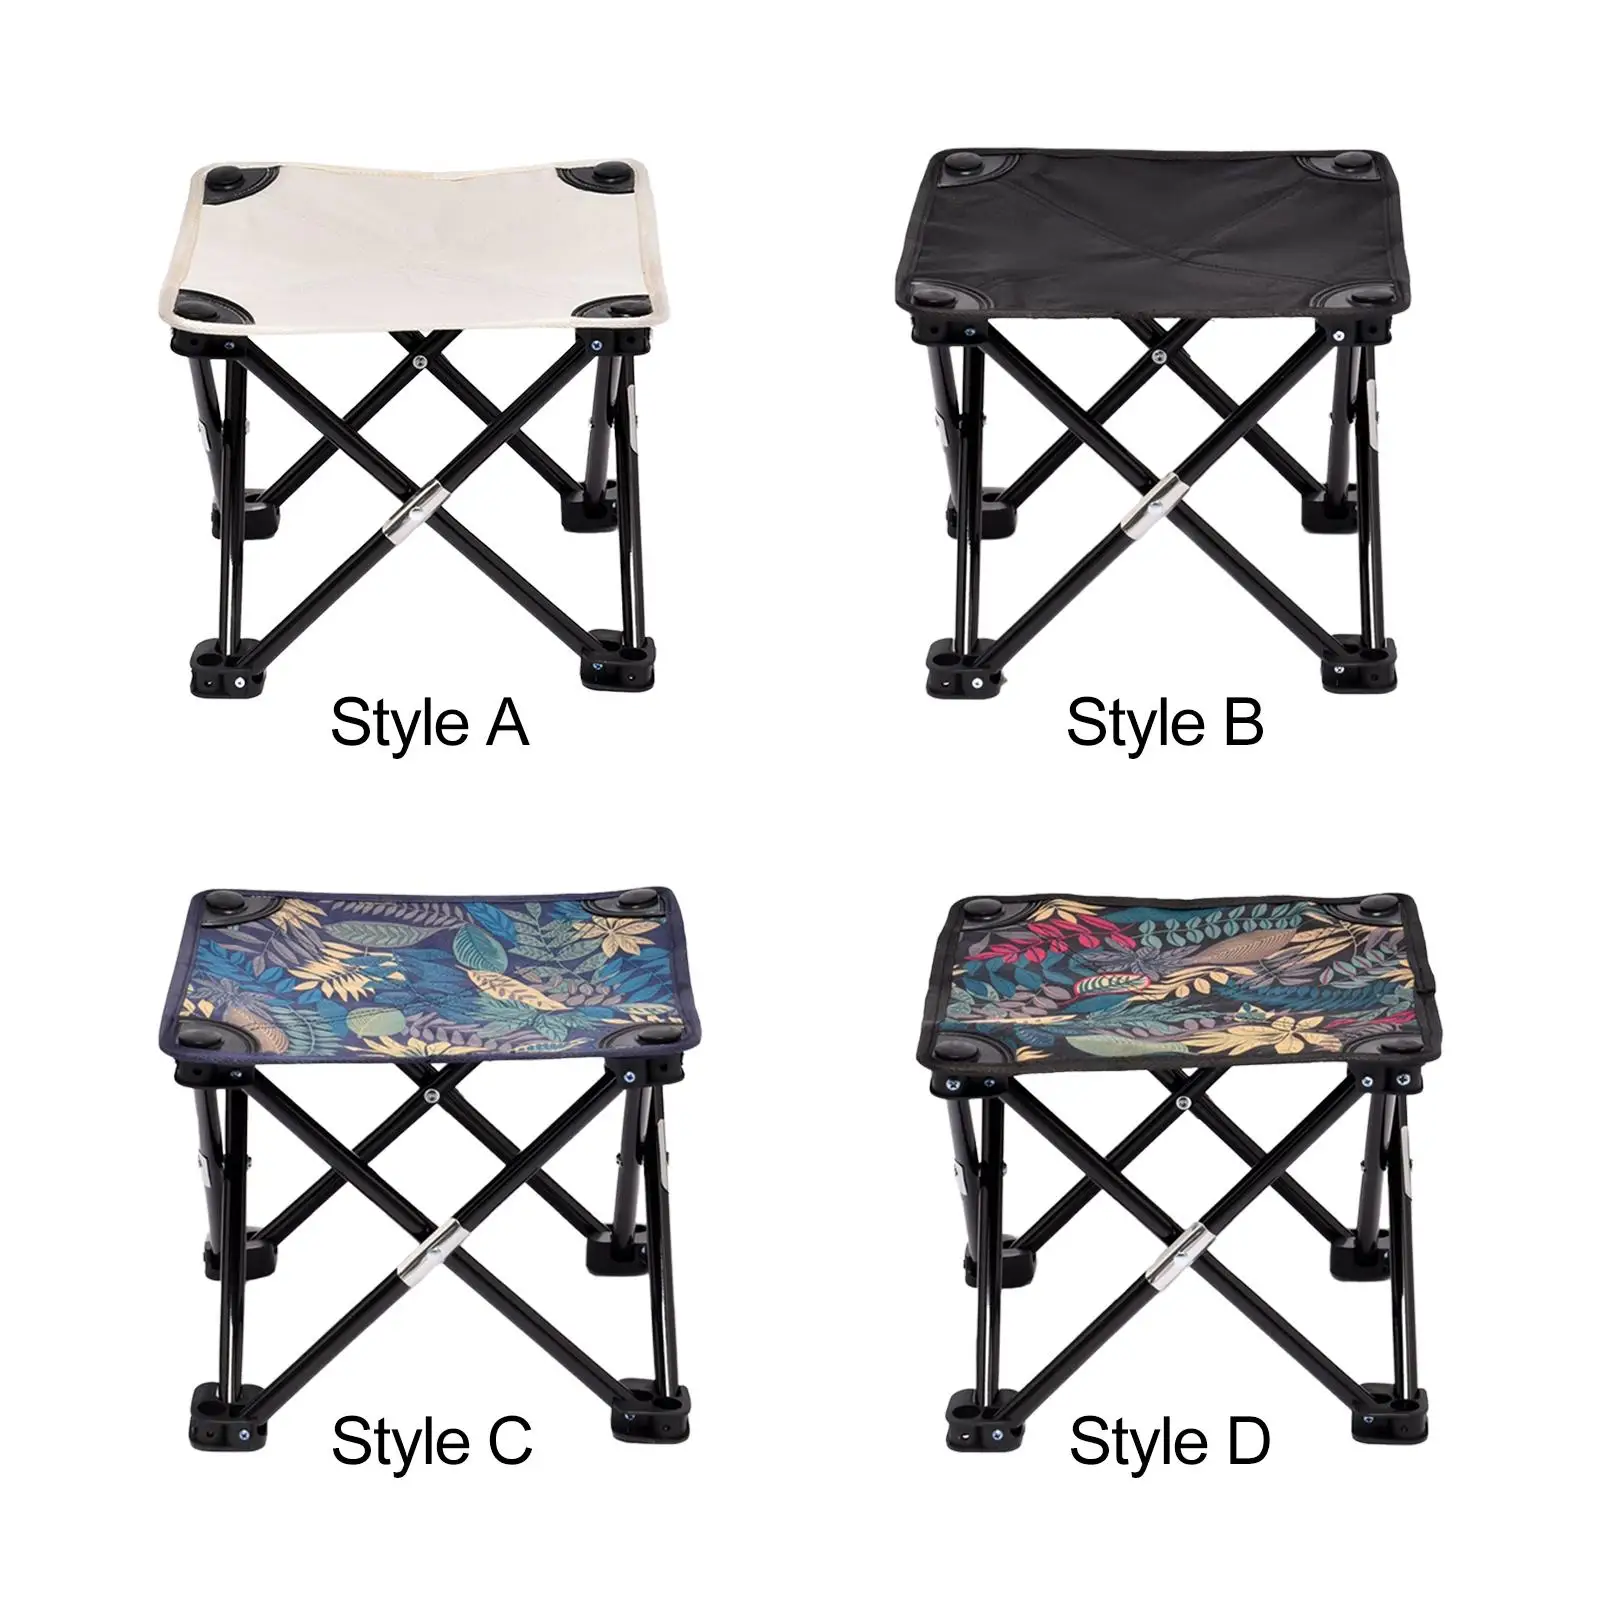 Folding Stools under Desk Footstool Ottoman Compact Collapsible Stool Portable Camping Chair Foot Stool for Travel Picnic Hiking